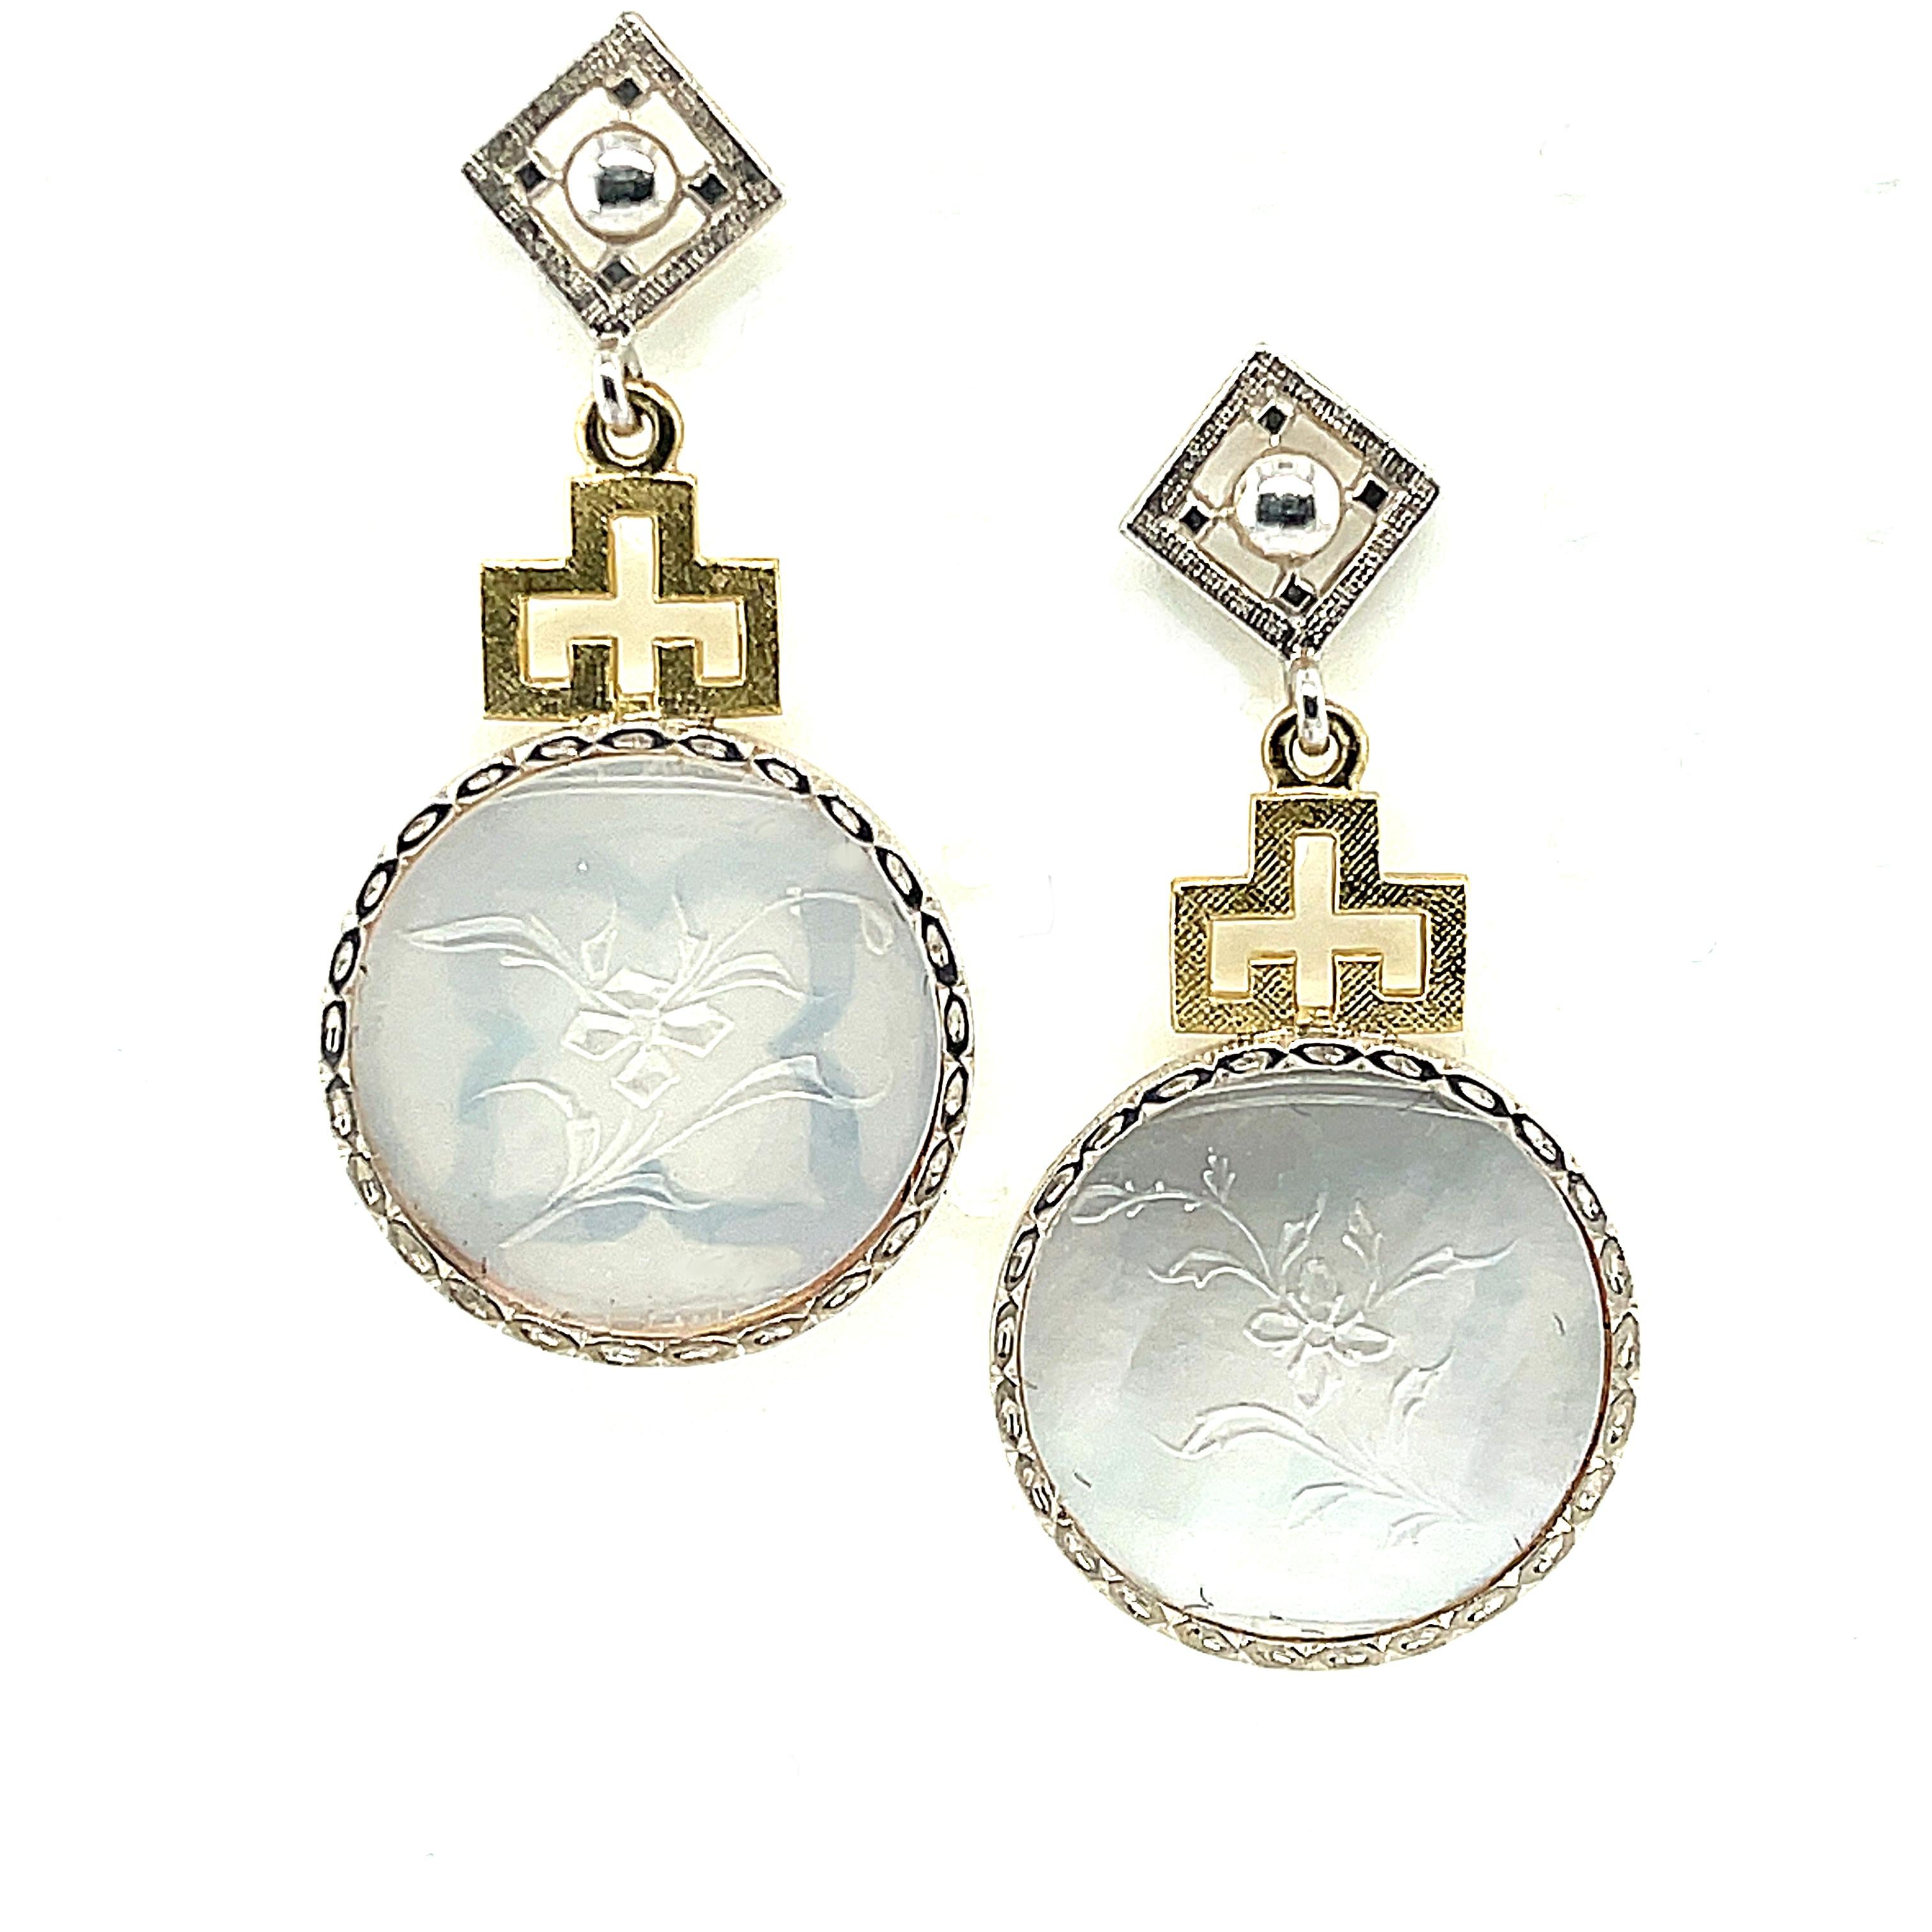 
These beautiful earrings feature antique, mother-of-pearl Chinese gambling counters with motifs dating back to the 18th Century. Originally carved in China for export to Britain, these gaming counters were used like we would use poker chips. Each